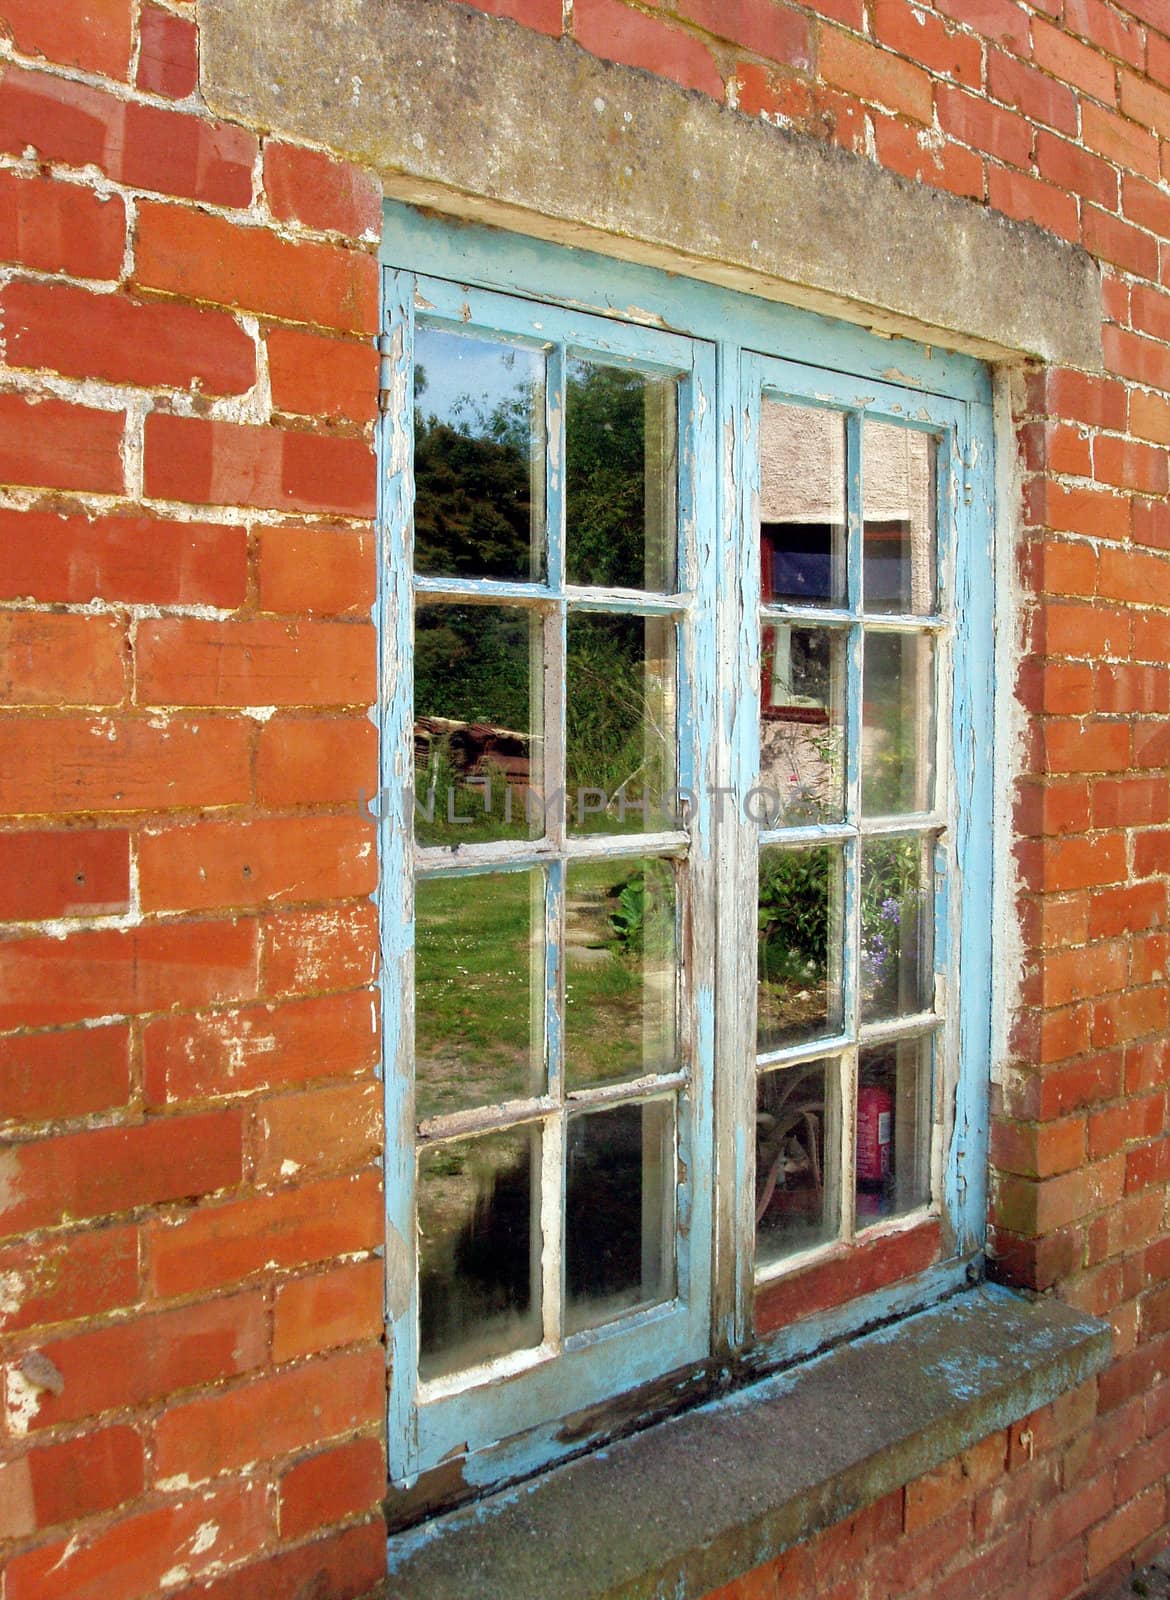 Windows on a country home    